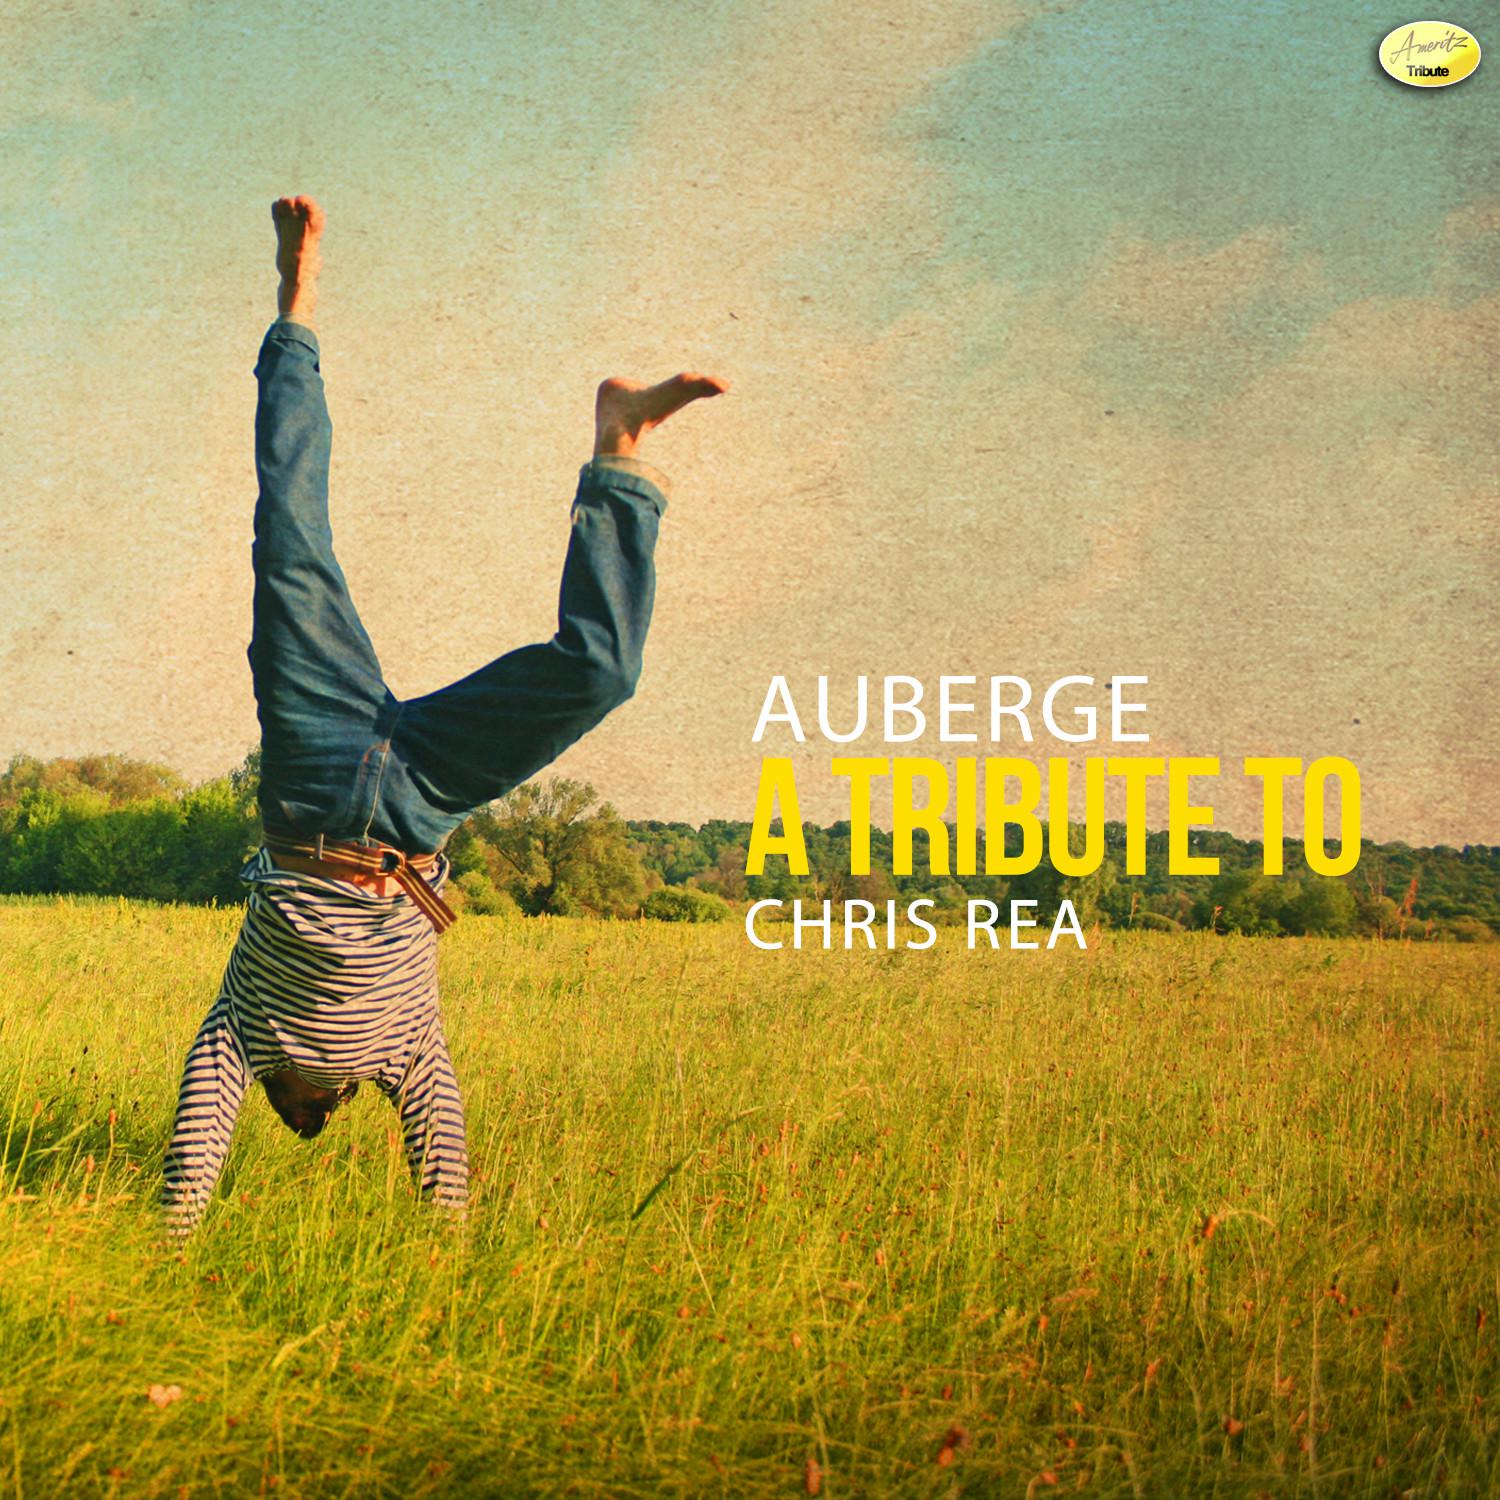 Auberge (A Tribute to Chris Rea)